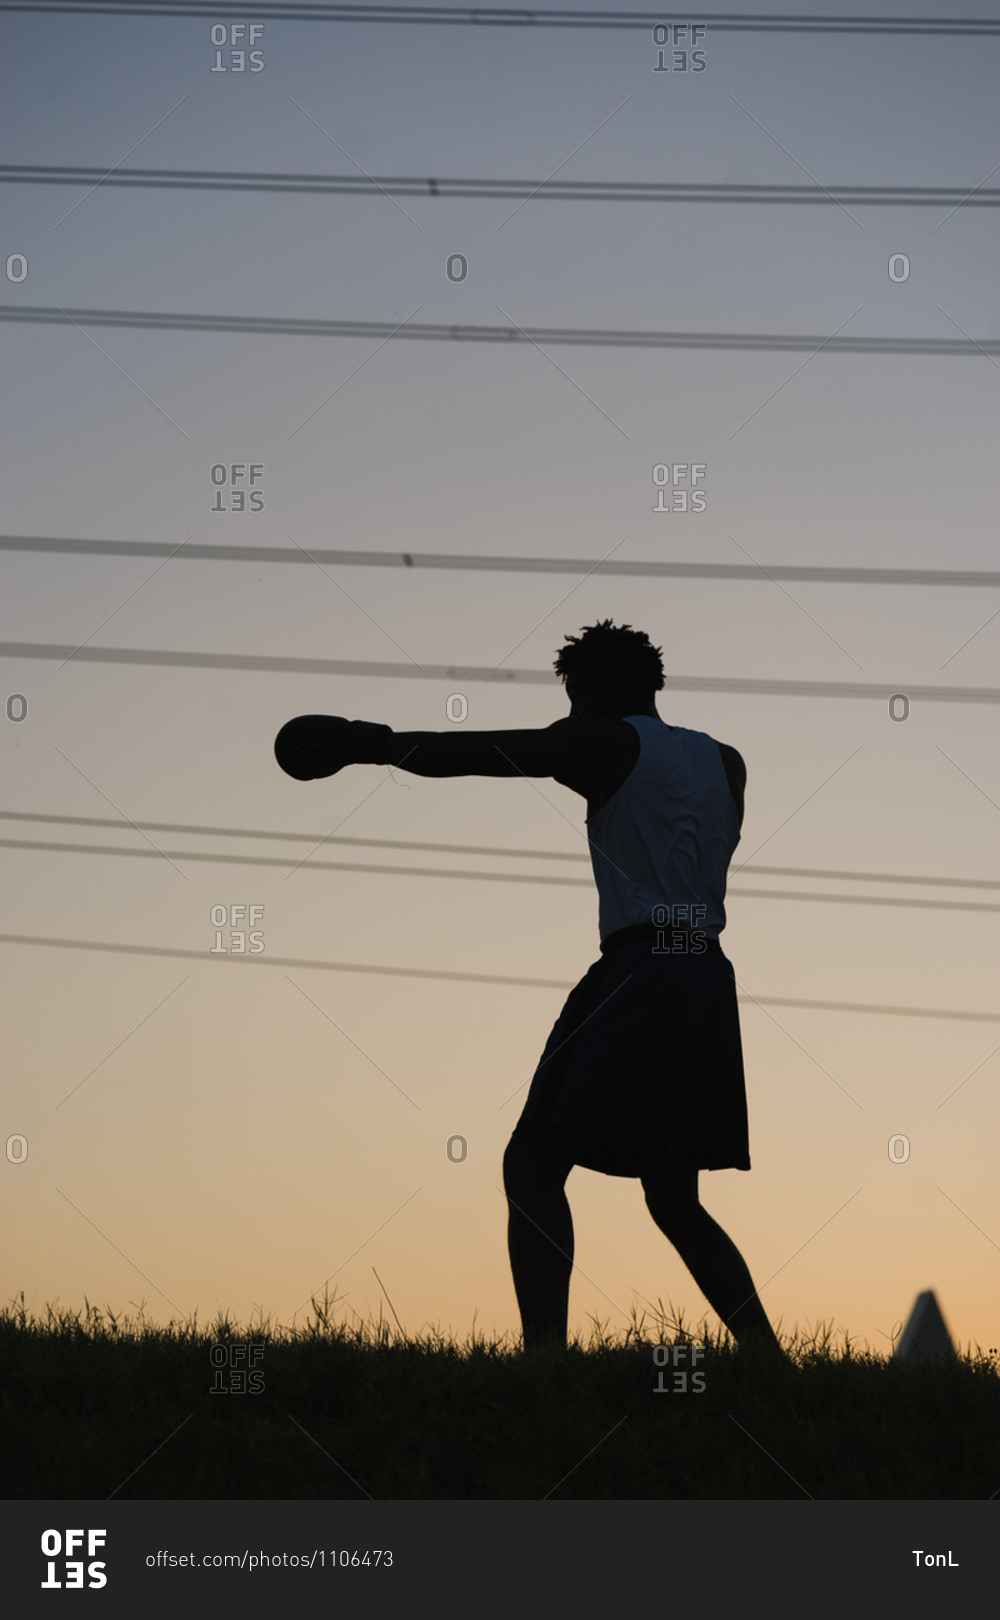 Silhouette of a black man boxing in the evening on a grassy field